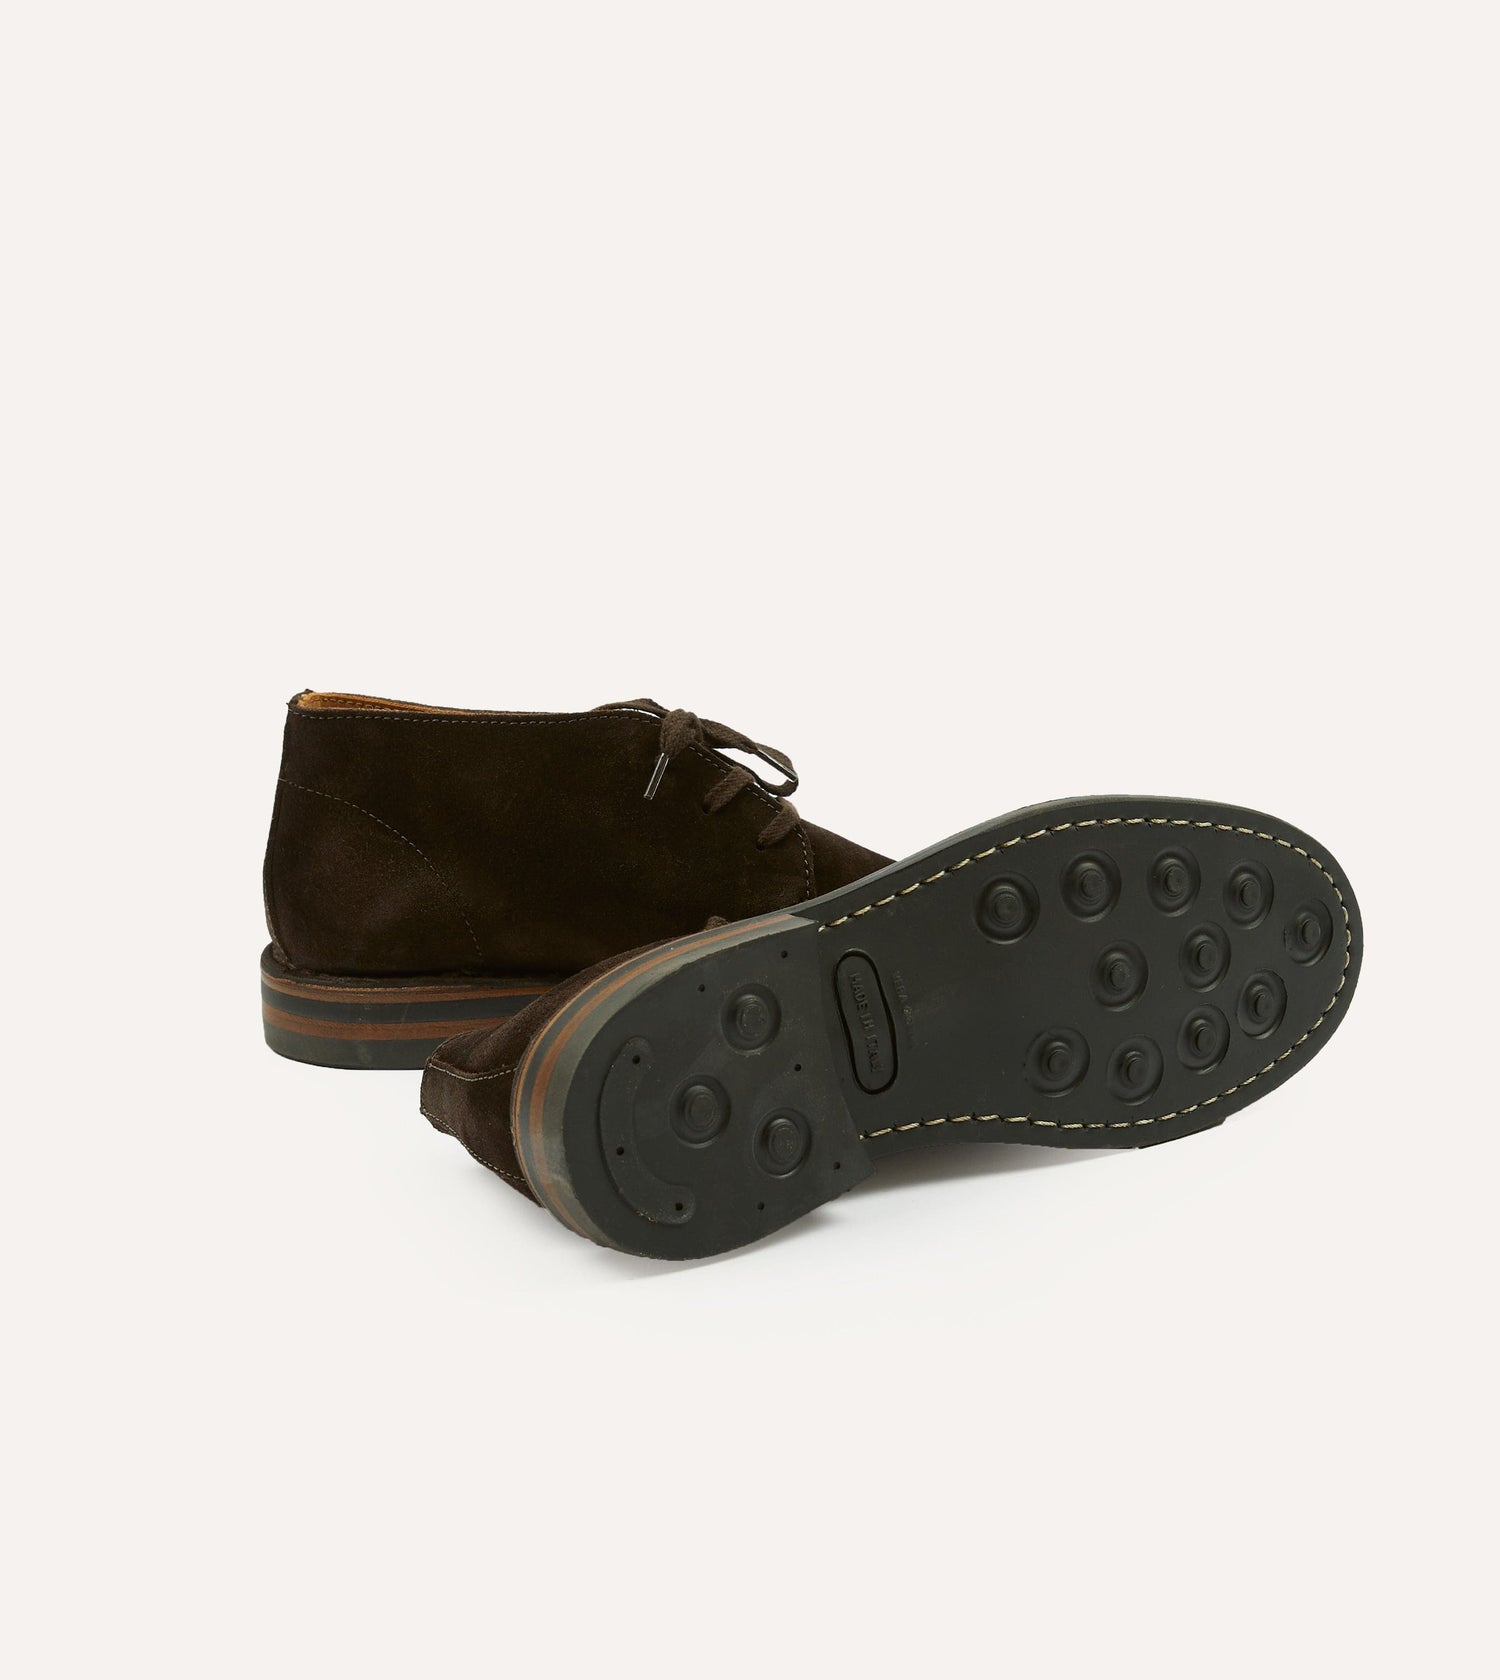 Crosby Moc-Toe Chukka Boot Dark Brown Roughout Suede with Rubber Sole